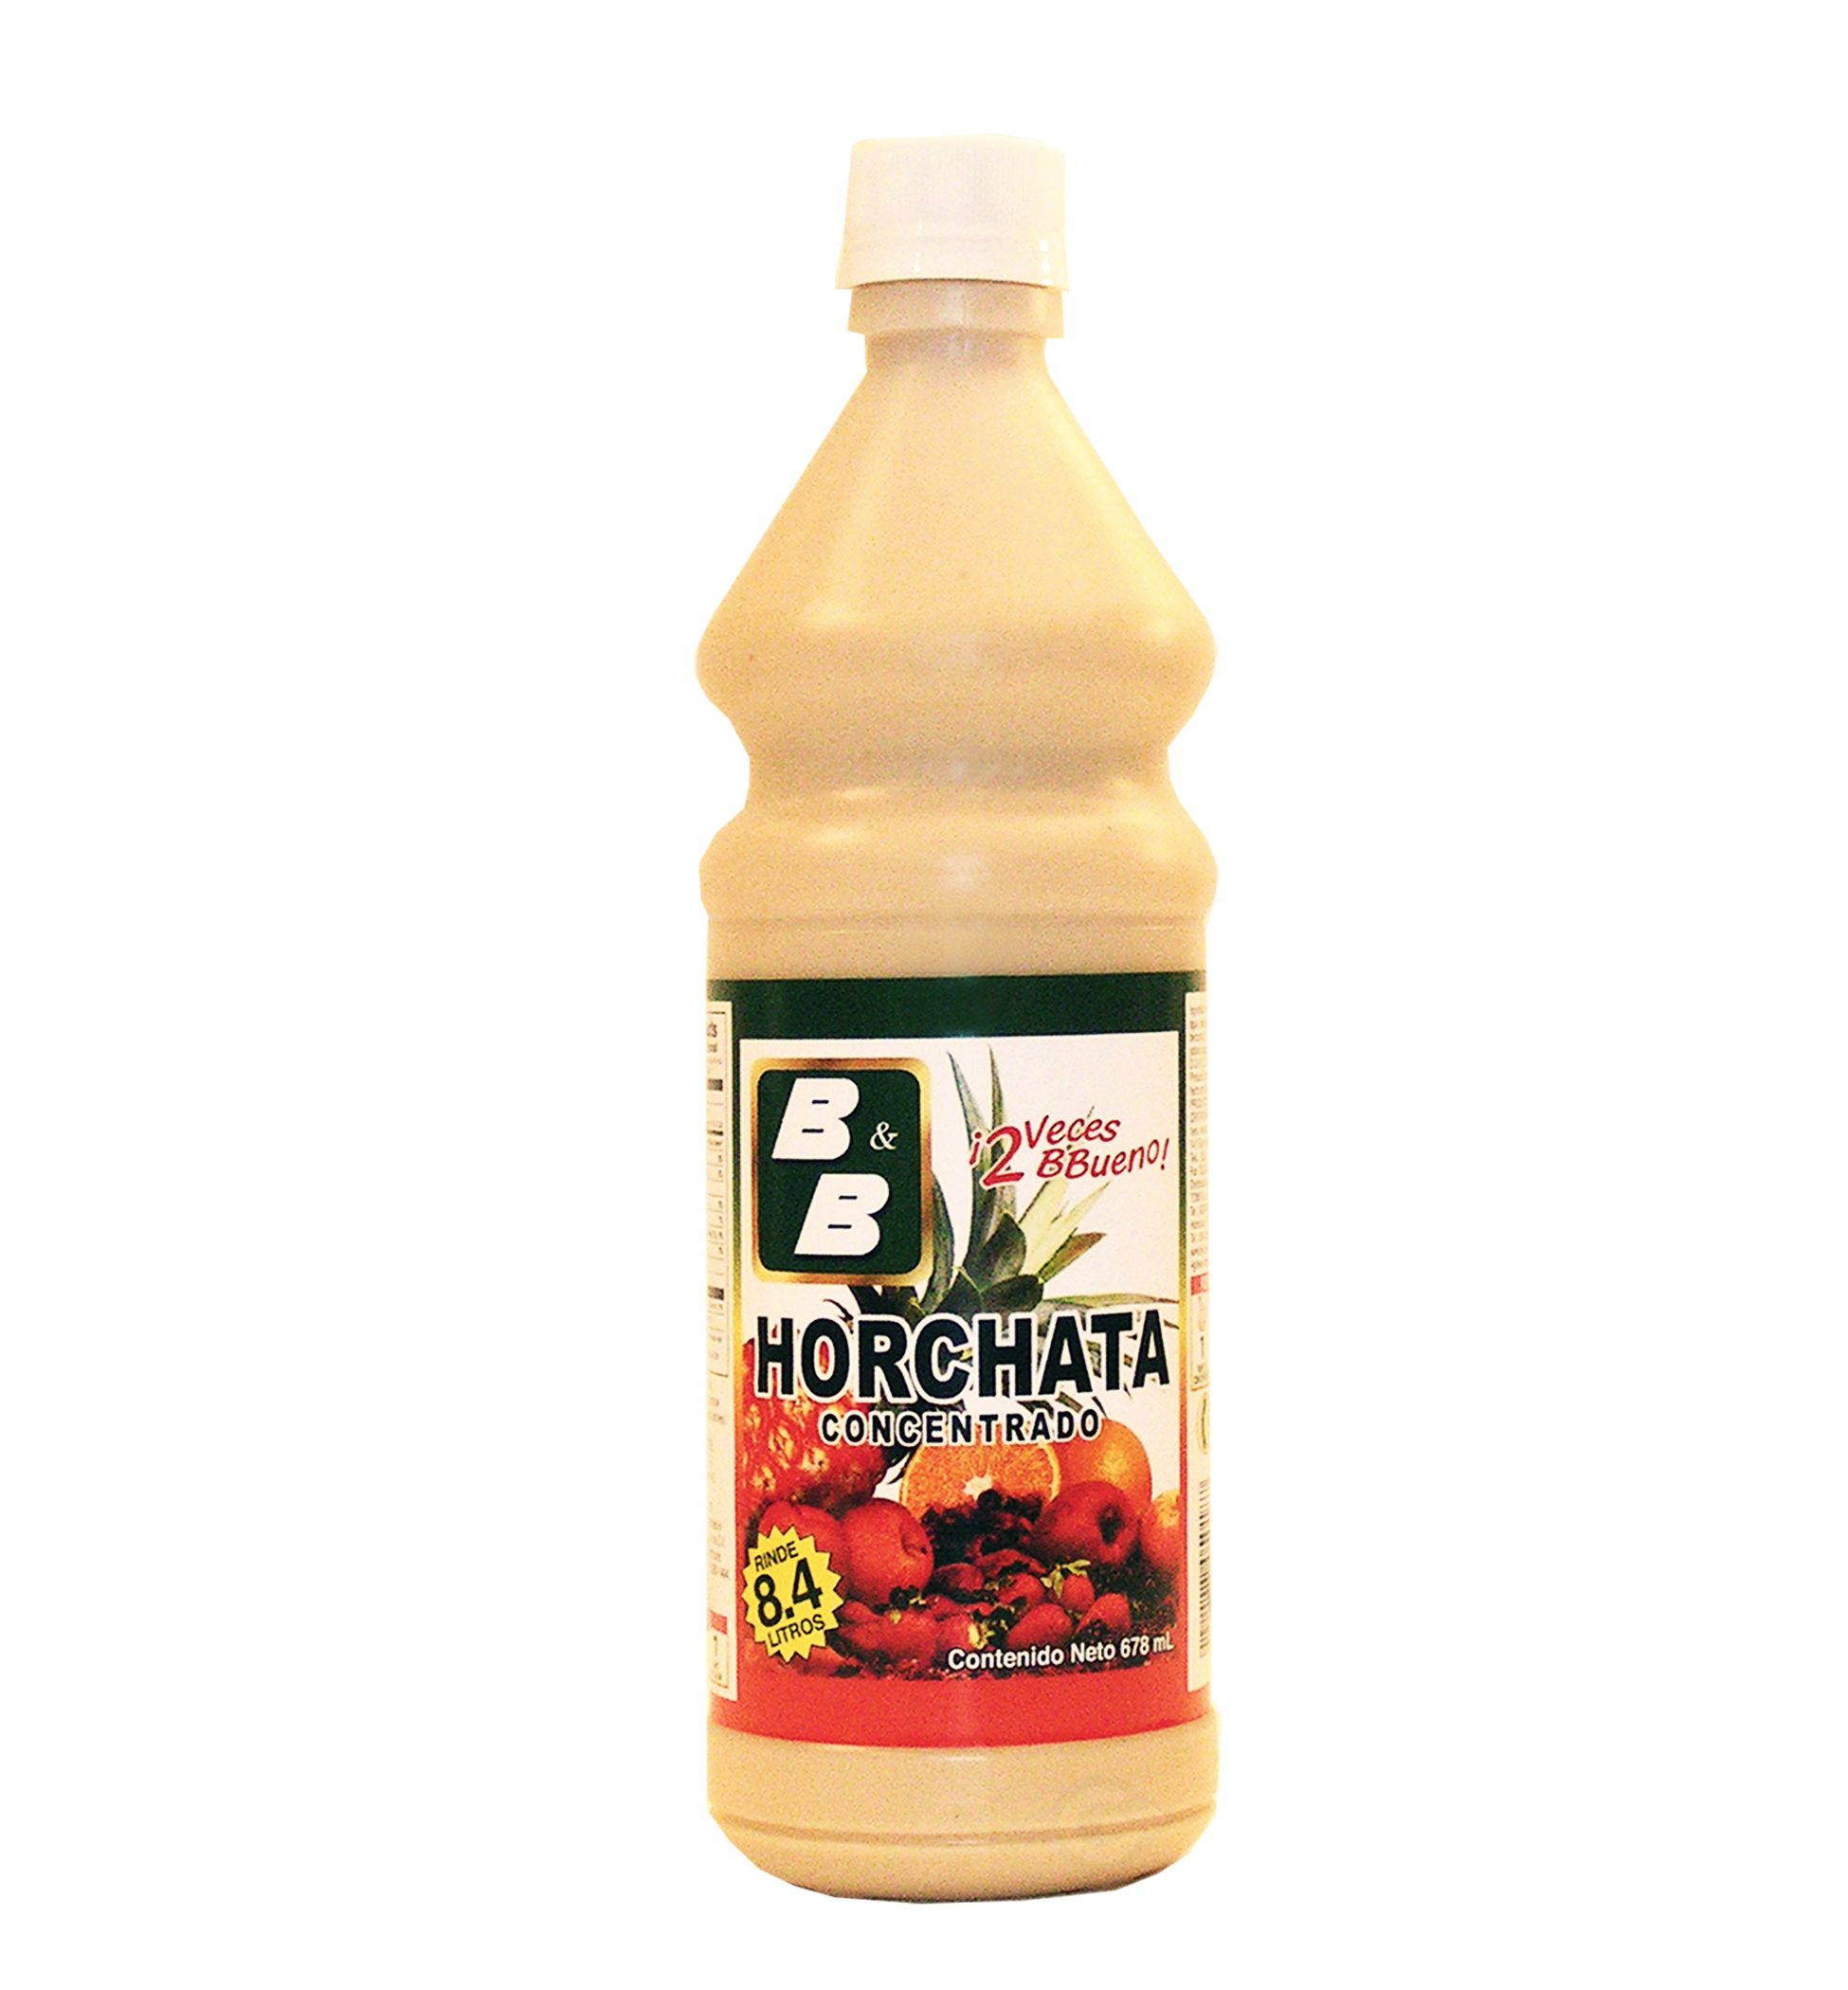 B&B Orgeat Concentrate 22.9 oz - Concentrado de Horchata (Pack of 1) - image 4 of 4